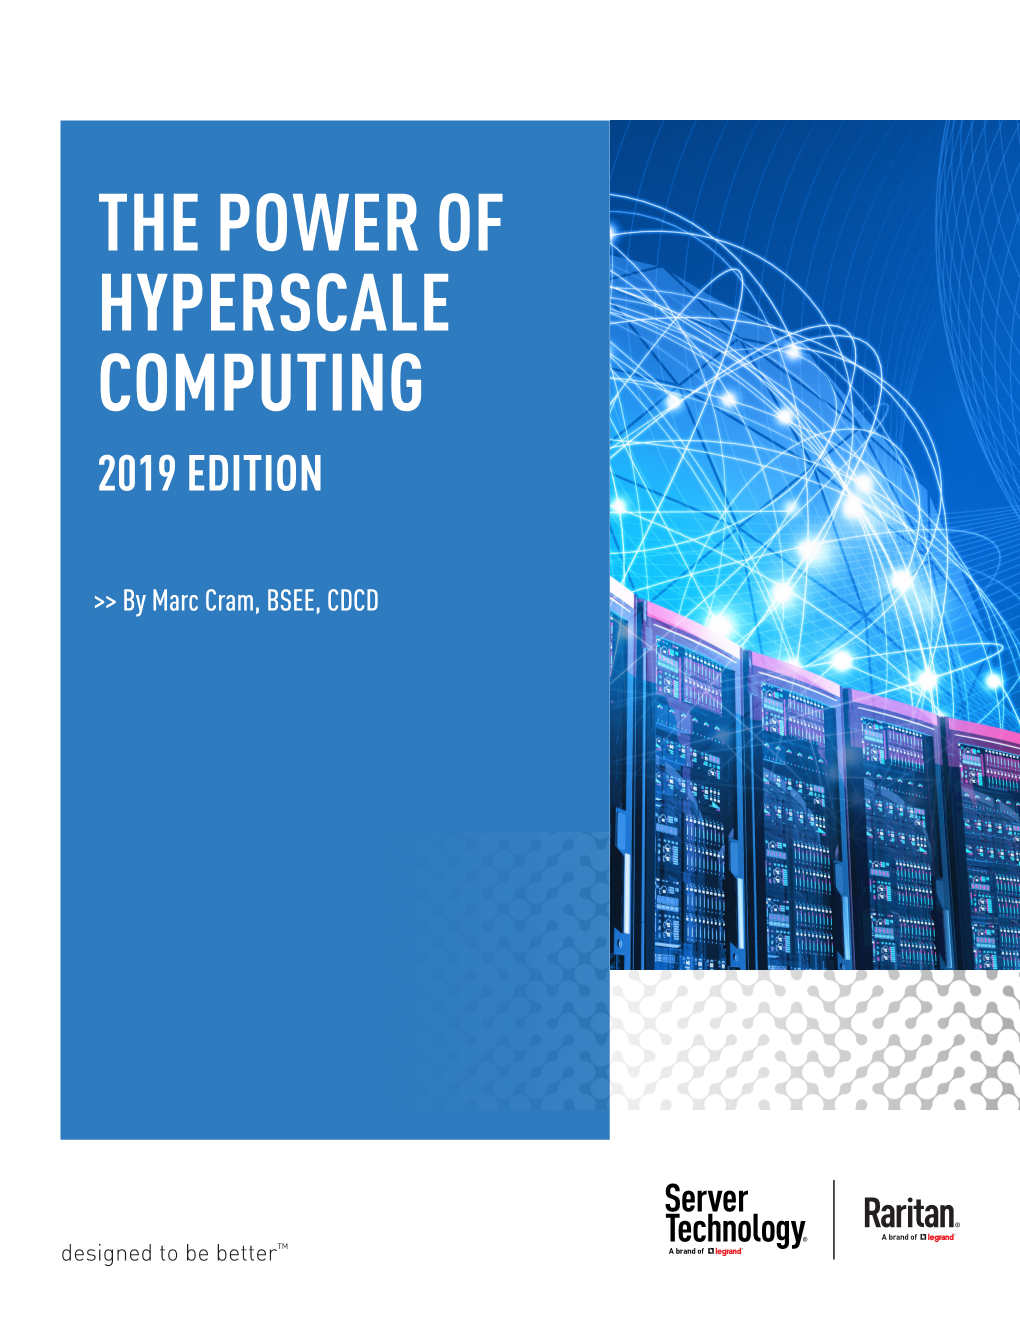 The Power of Hyperscale Computing 2019 Edition